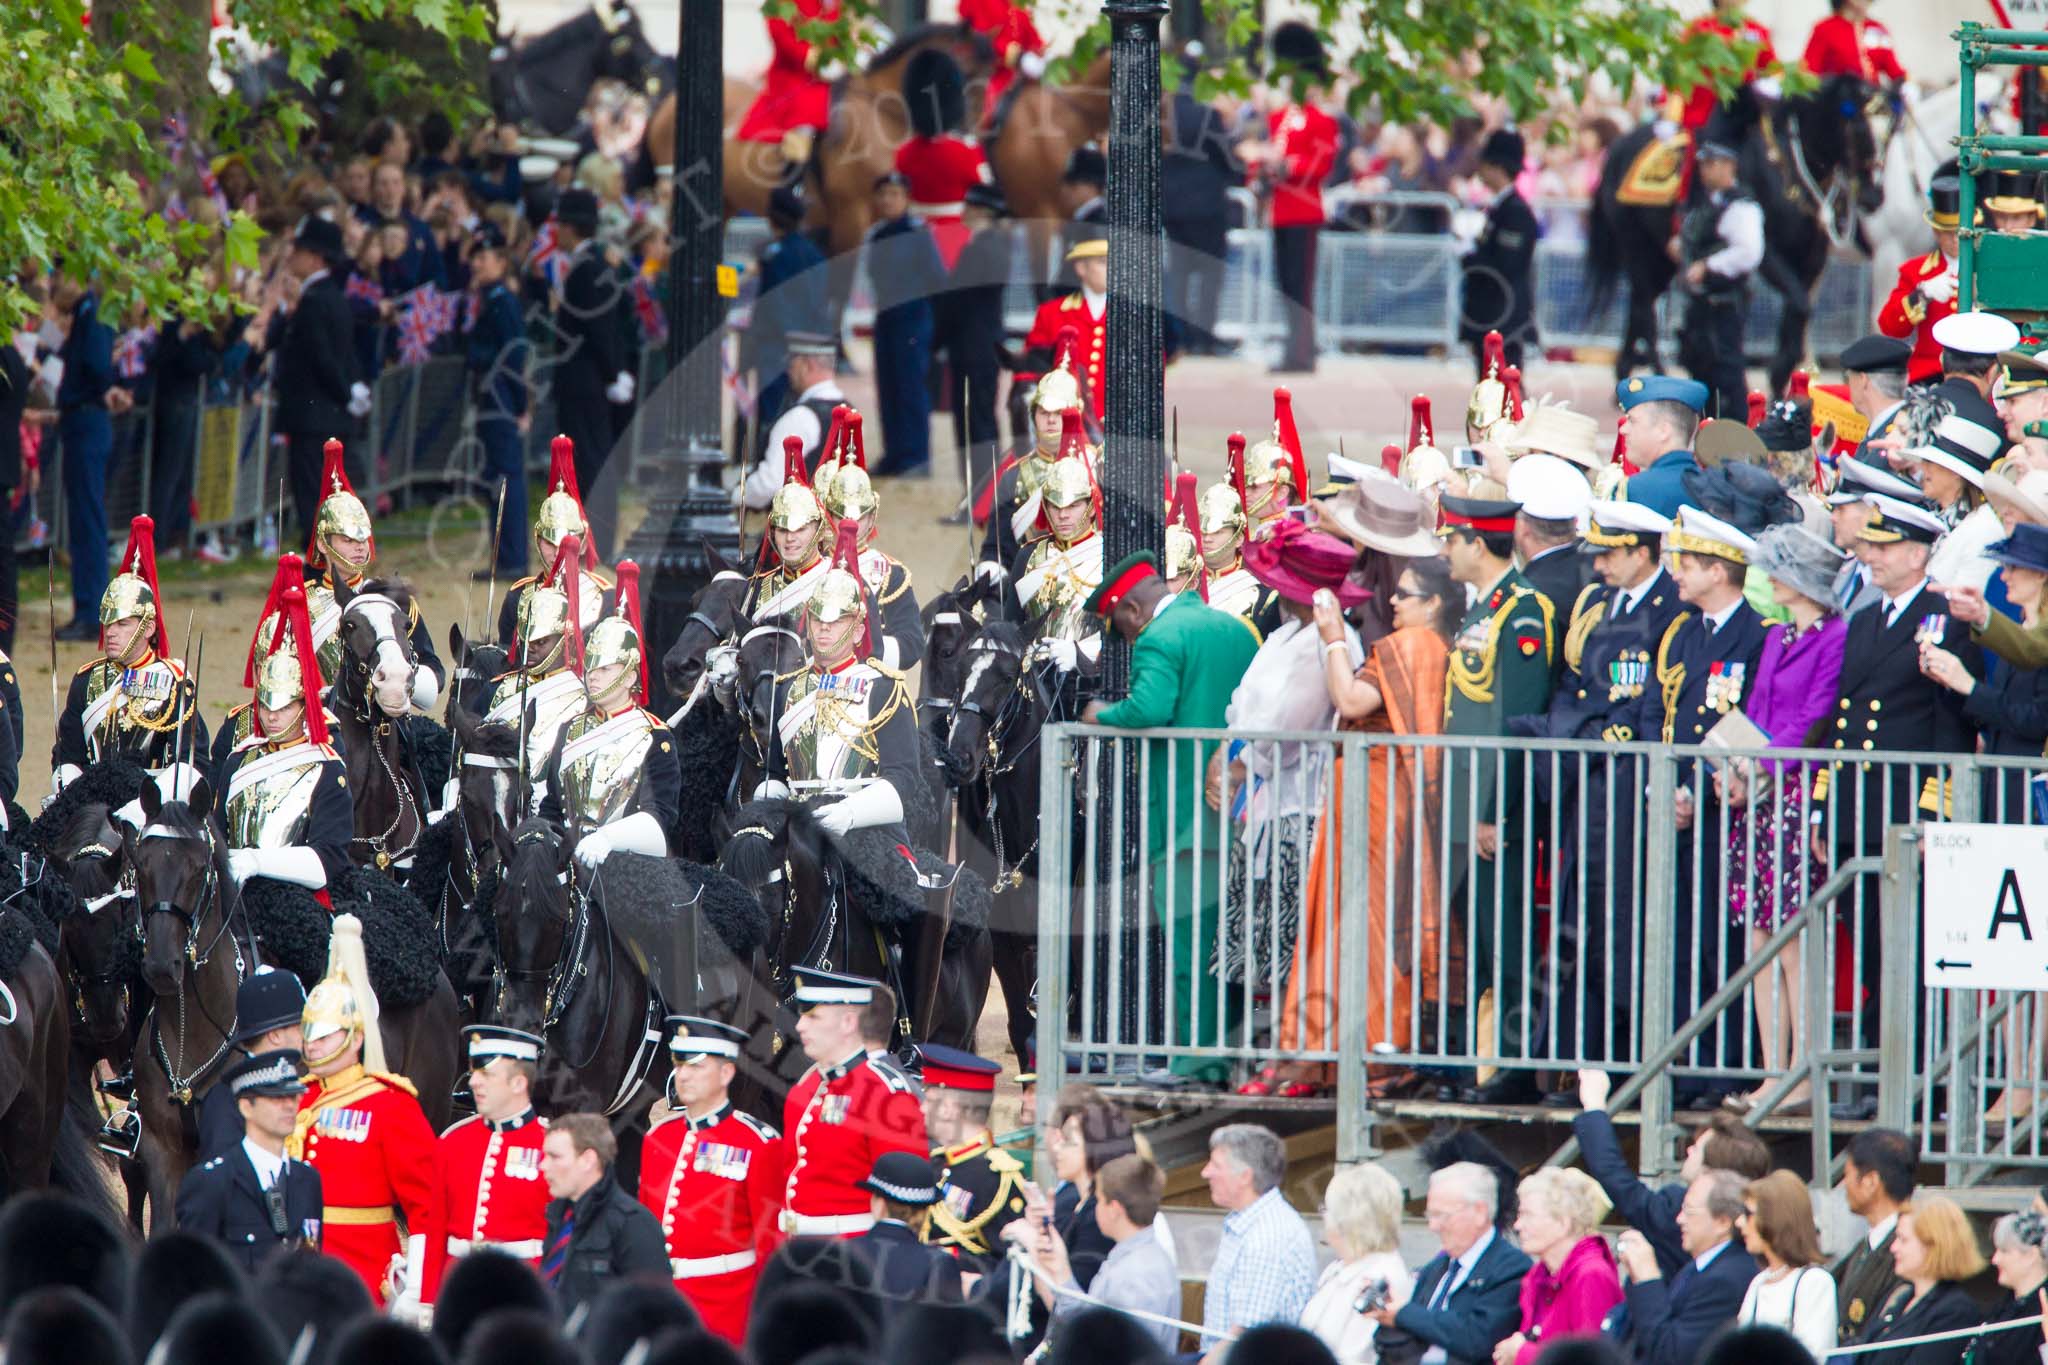 Trooping the Colour 2012: The Blues and Royals arriving as First and Second Division of the Souvereign's Escort..
Horse Guards Parade, Westminster,
London SW1,

United Kingdom,
on 16 June 2012 at 10:57, image #147